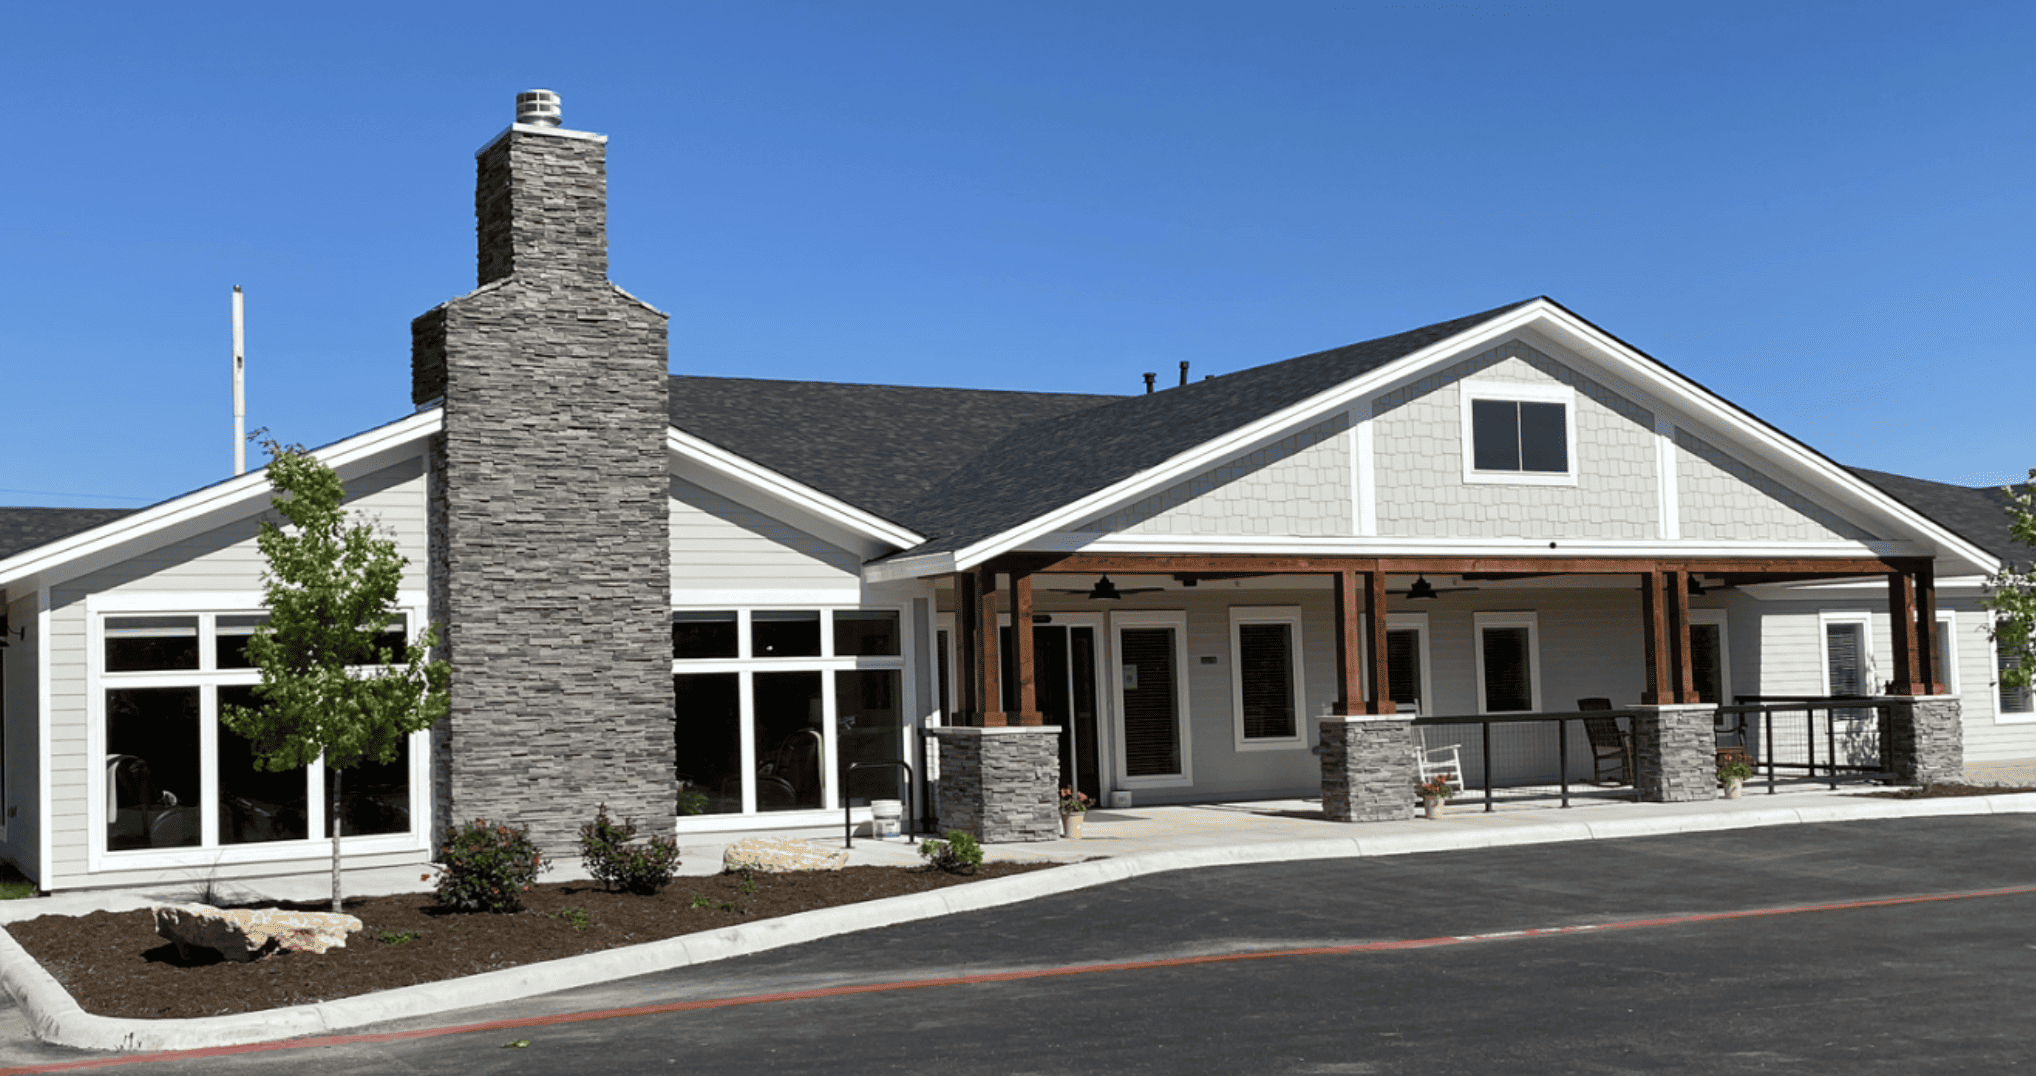 The front entrance of BeeHive Homes of Crownridge Assisted Living.